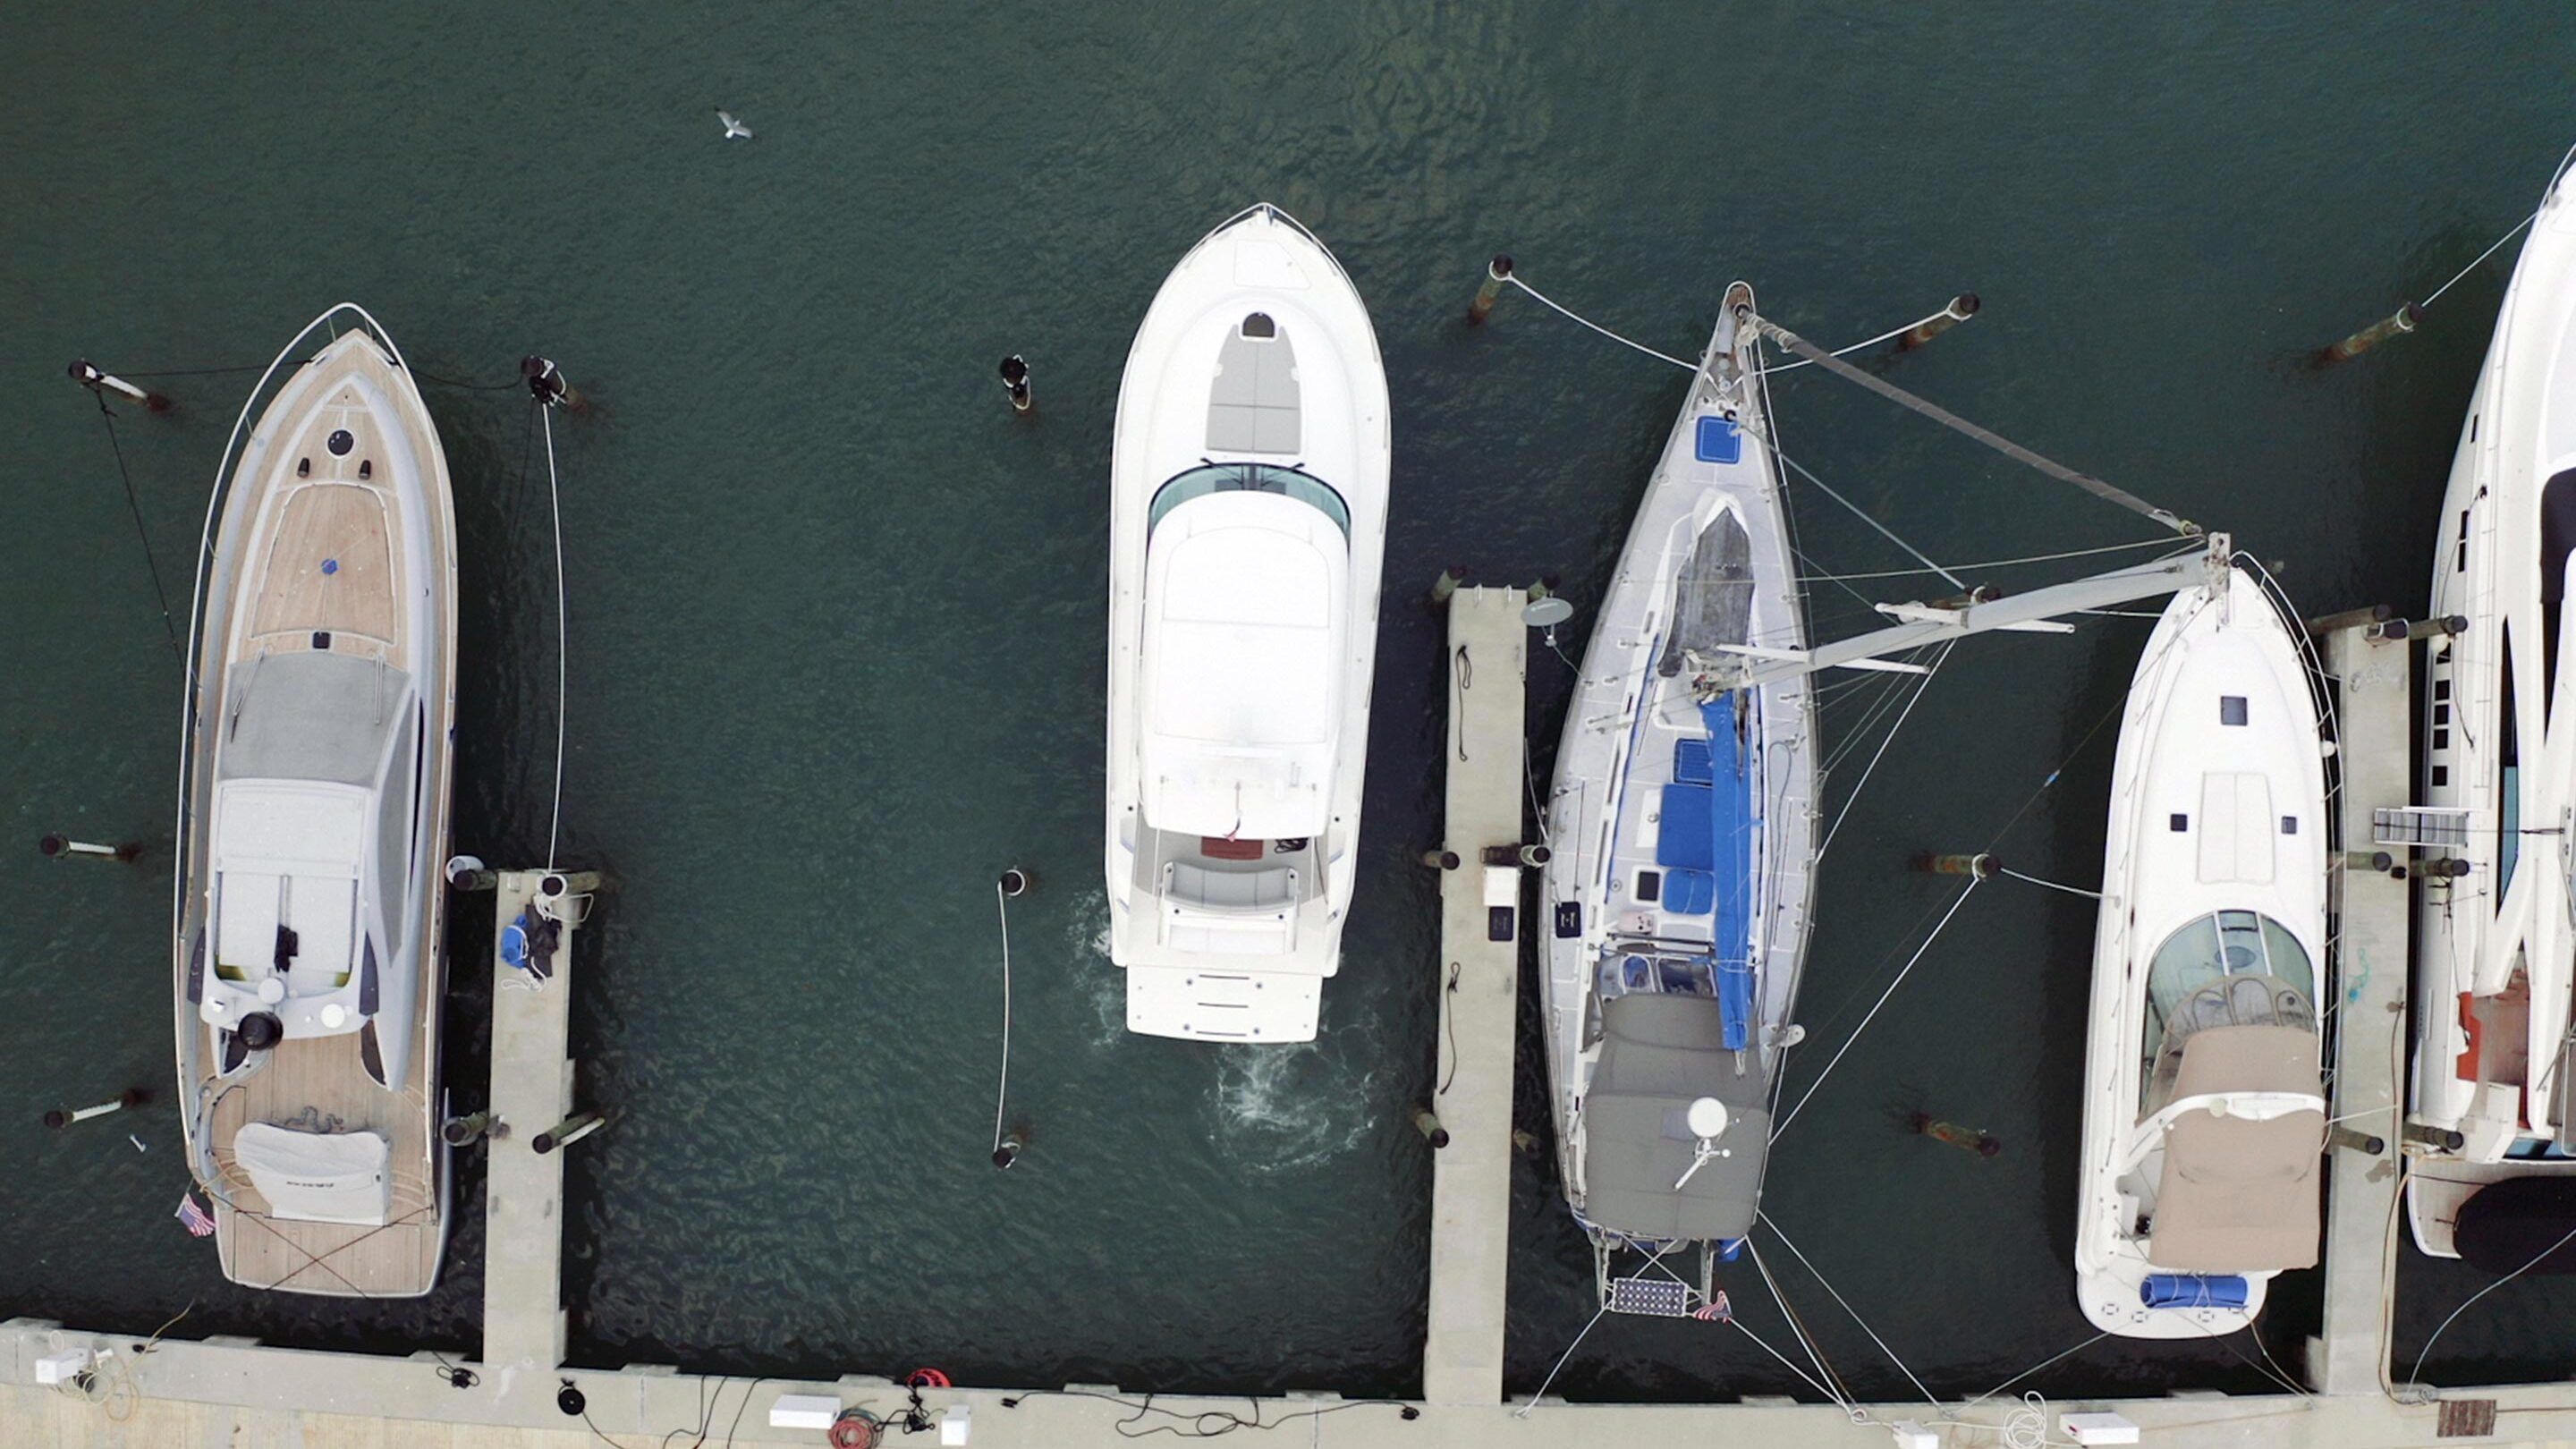 How to master the art of boat docking – 10 tips